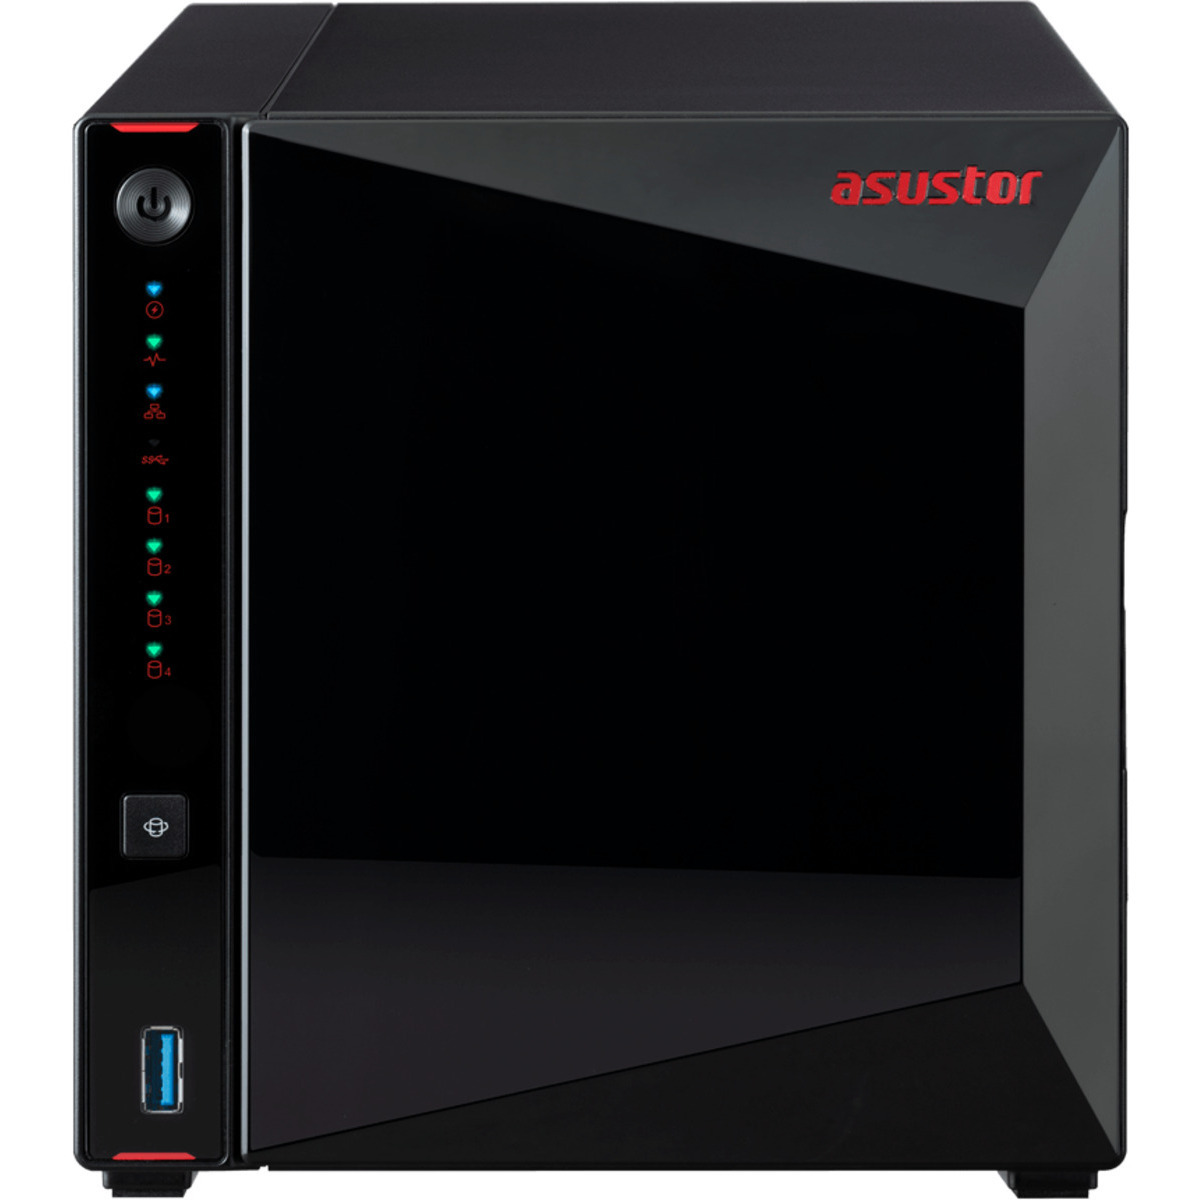 ASUSTOR AS5304T Nimbustor 72tb 4-Bay Desktop Multimedia / Power User / Business NAS - Network Attached Storage Device 4x18tb Seagate IronWolf Pro ST18000NT001 3.5 7200rpm SATA 6Gb/s HDD NAS Class Drives Installed - Burn-In Tested - FREE RAM UPGRADE AS5304T Nimbustor